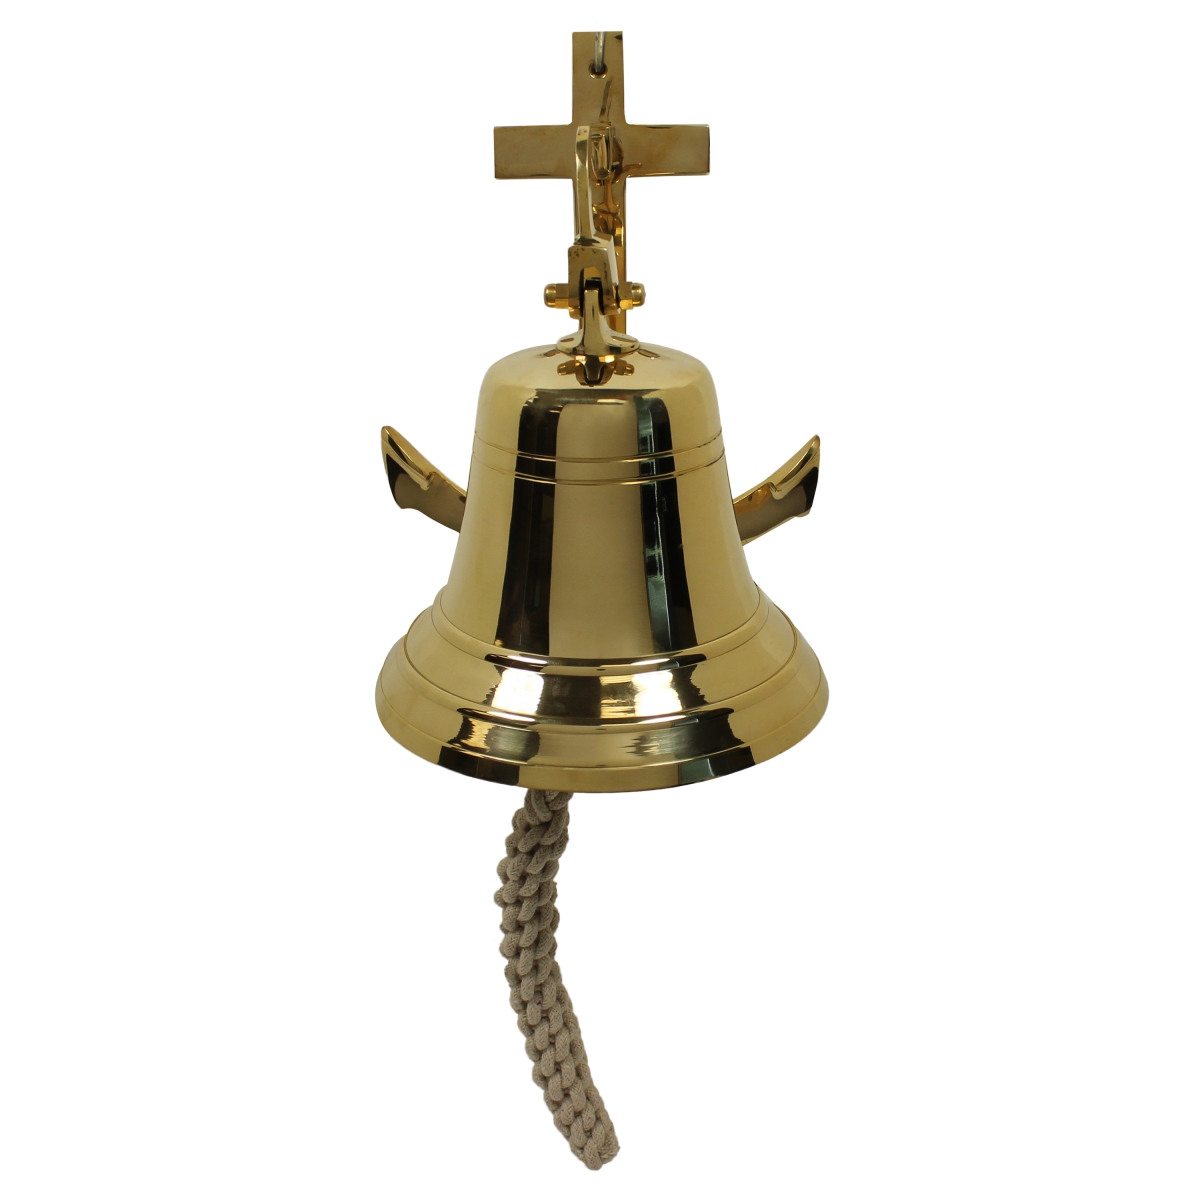 Urban Designs 8800108 11 X 8.75 X 11 In. Nautical Solid Brass Ship Bell With Anchor Mounting Bracket, Large